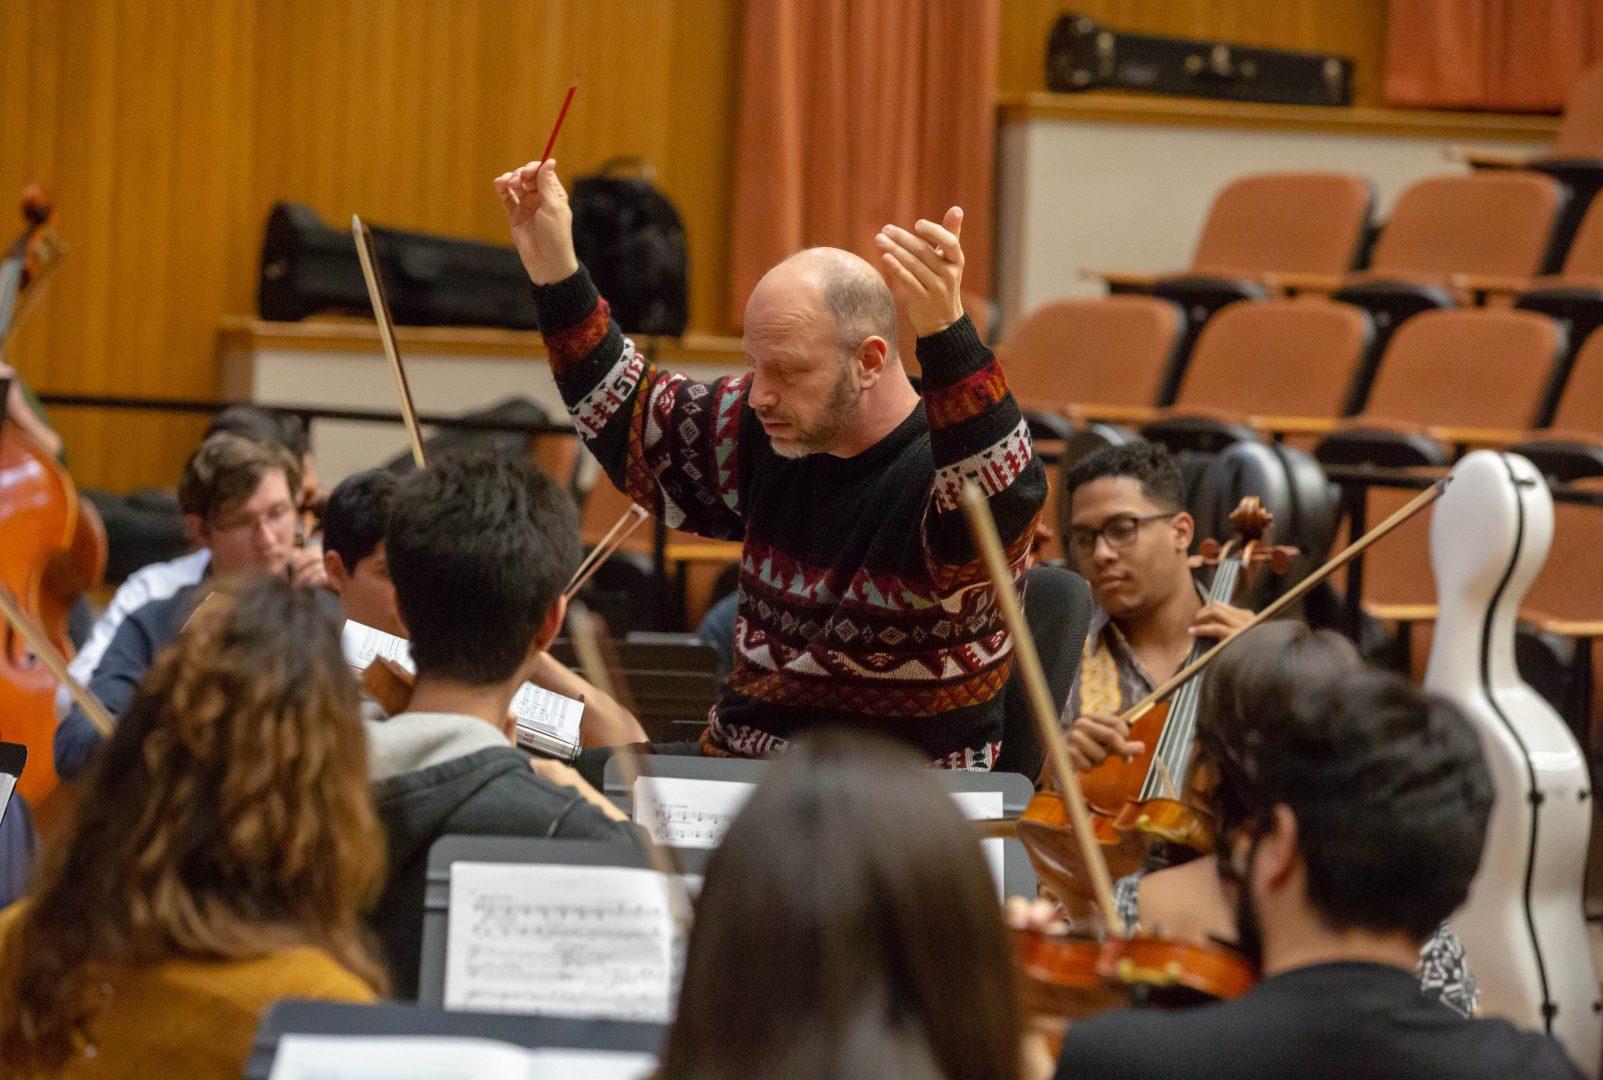 Fresno+State+professor+and+conductor+Dr.+Thomas+Loewenheim%2C+the+Fresno+State+Symphony+Orchestra%2C+and+the+Opera+Theatre+practice+for+Madama+Butterfly+at+the+Fresno+State+Concert+Hall+on+Monday%2C+Feb.+25%2C+2019.+%28Jose+Romo+Jr.%2FThe+Collegian%29.+